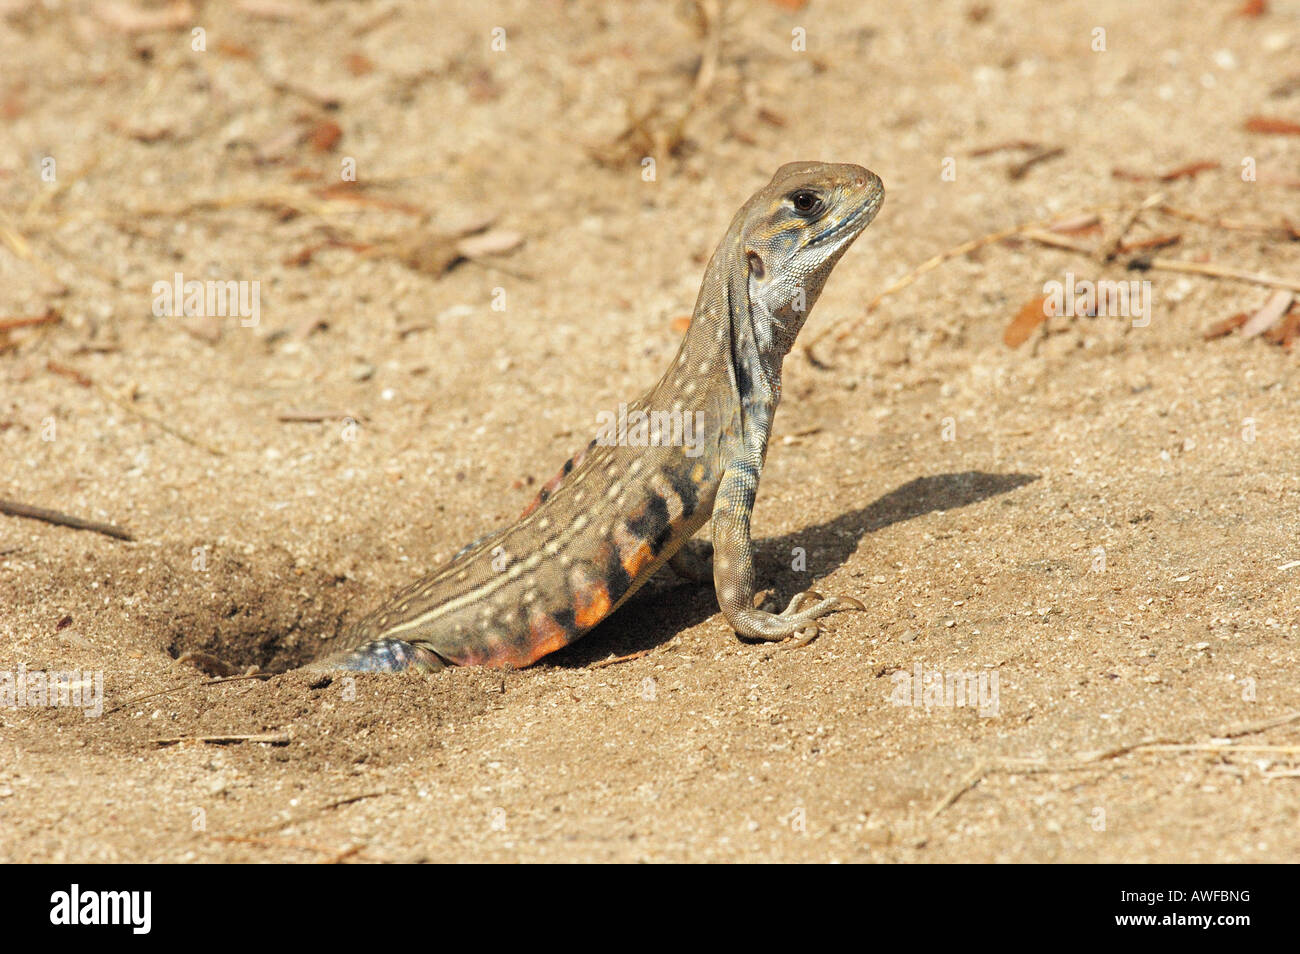 Common Butterfly Lizard (Leiolepis belliana)  emerging from its burrow,Thailand. Stock Photo